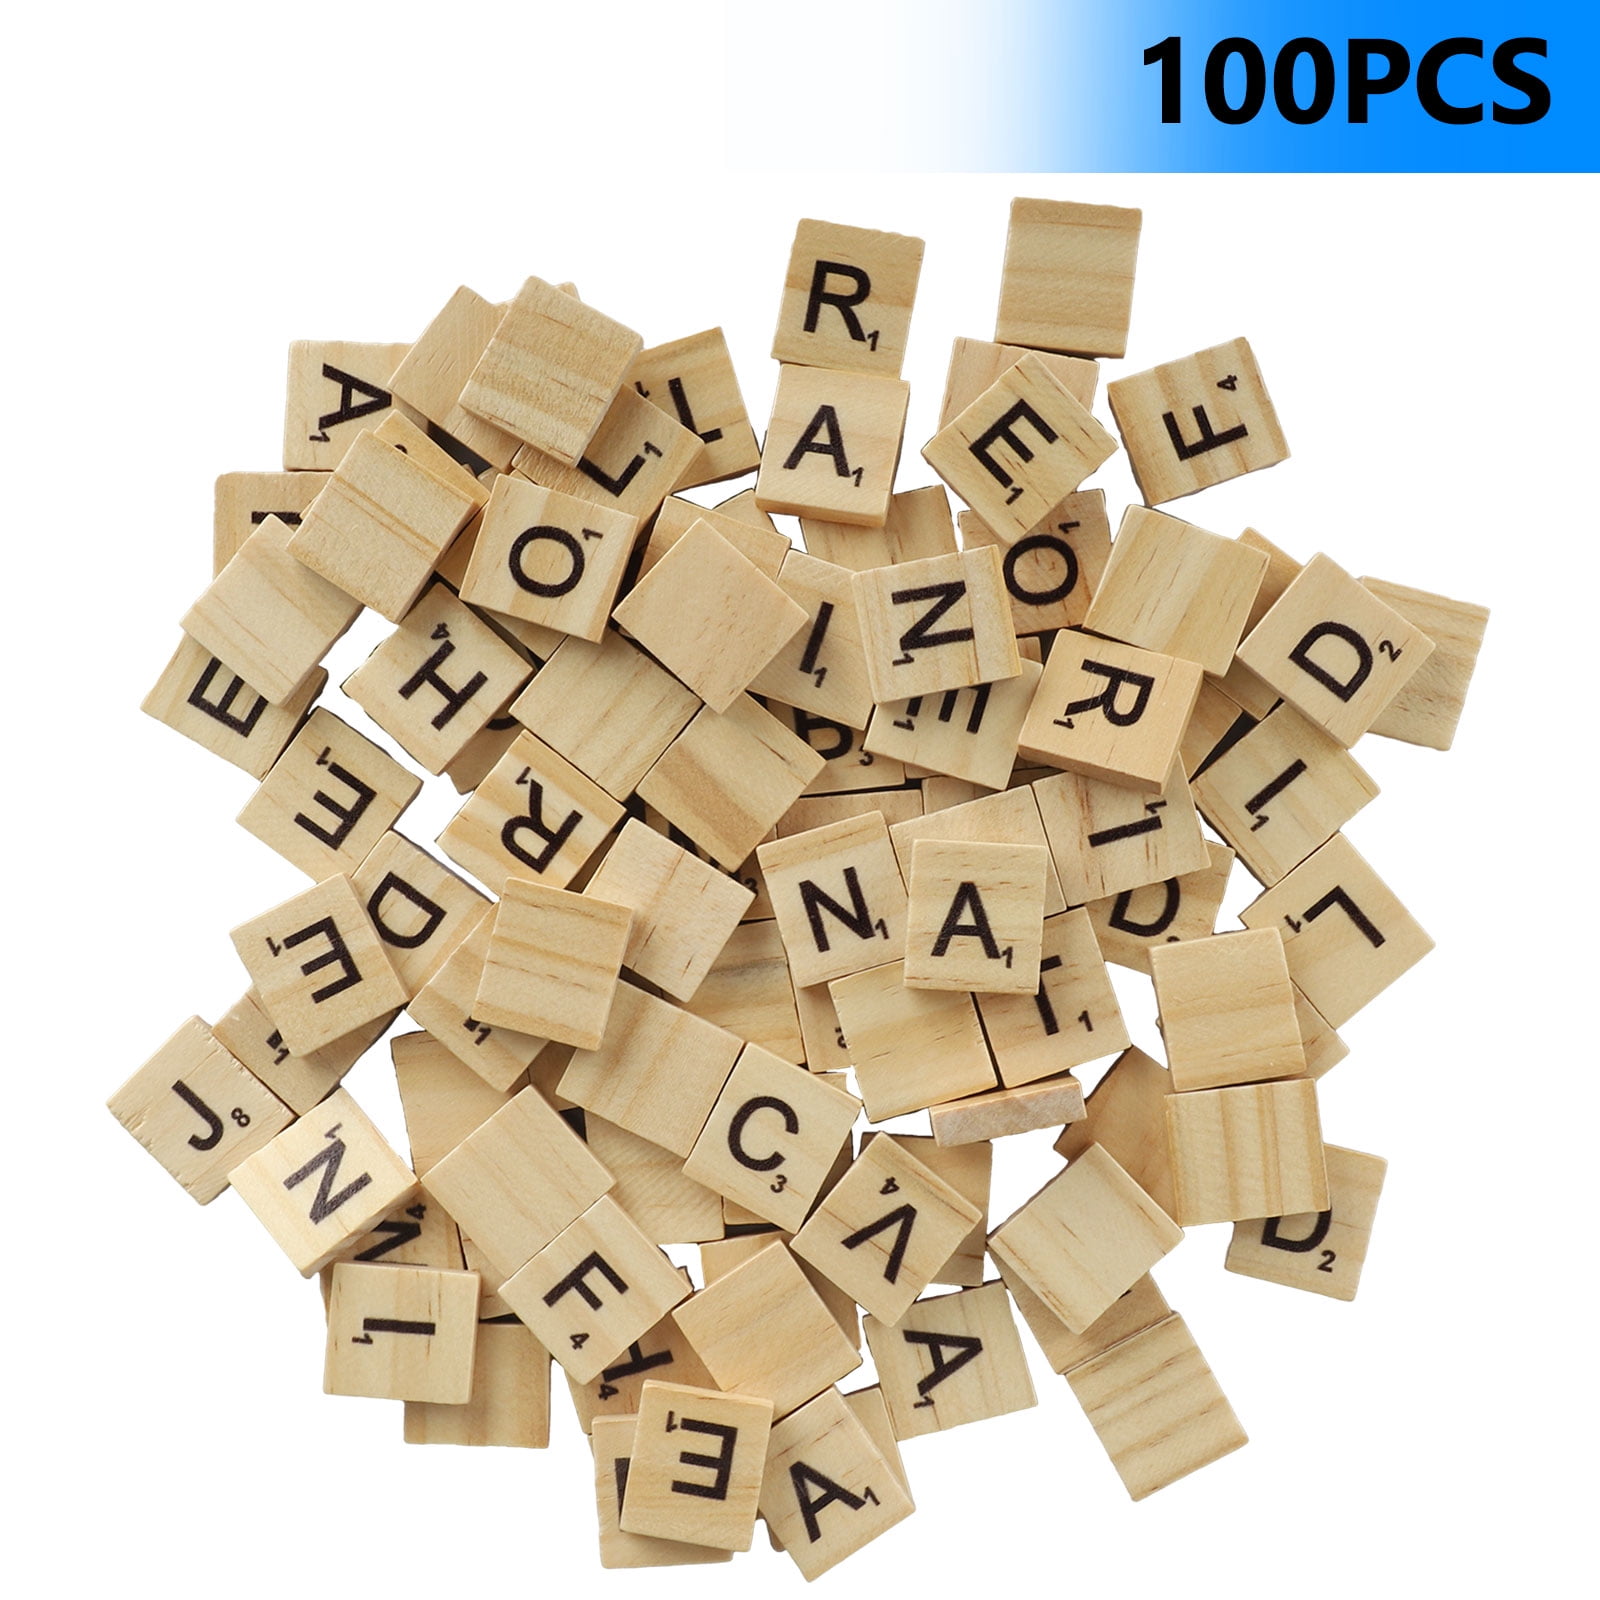 100 PLASTIC SCRABBLES TILES BLUE/WHITE LETTERS NUMBERS FOR CRAFTS UK SELLER 